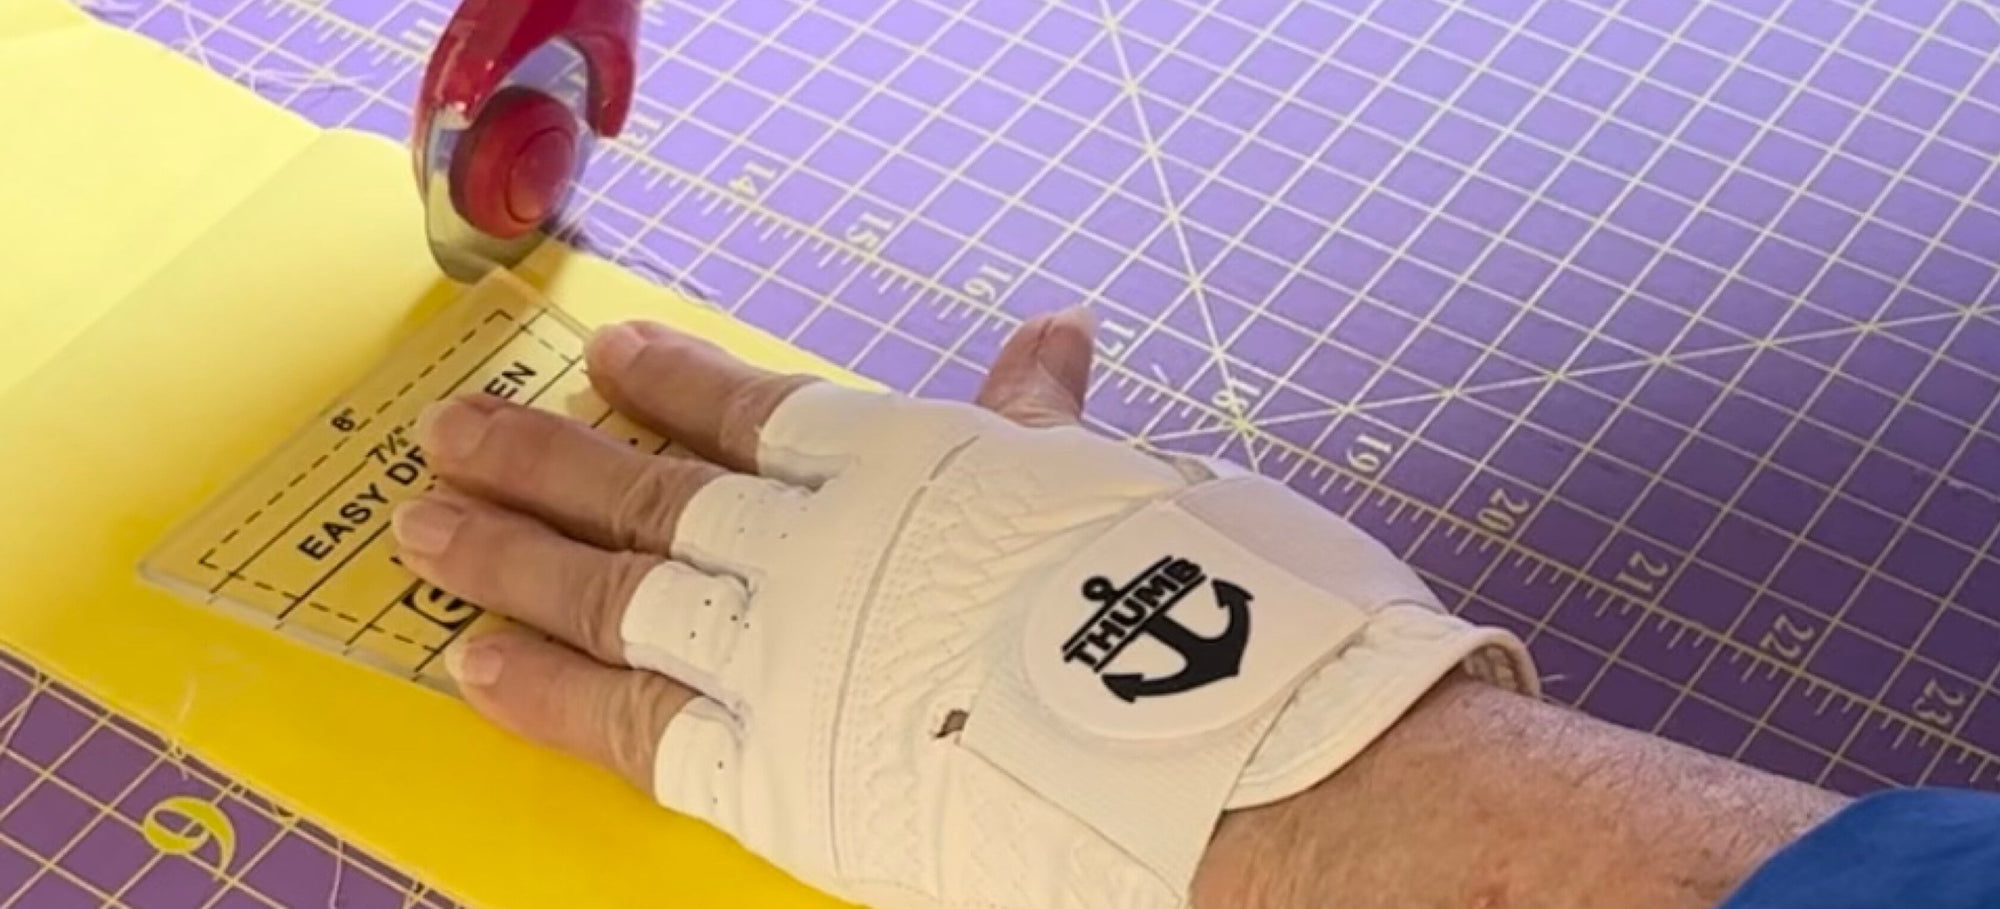 Pattern Cutting with White Fingerless Arthritis Glove for Quilters